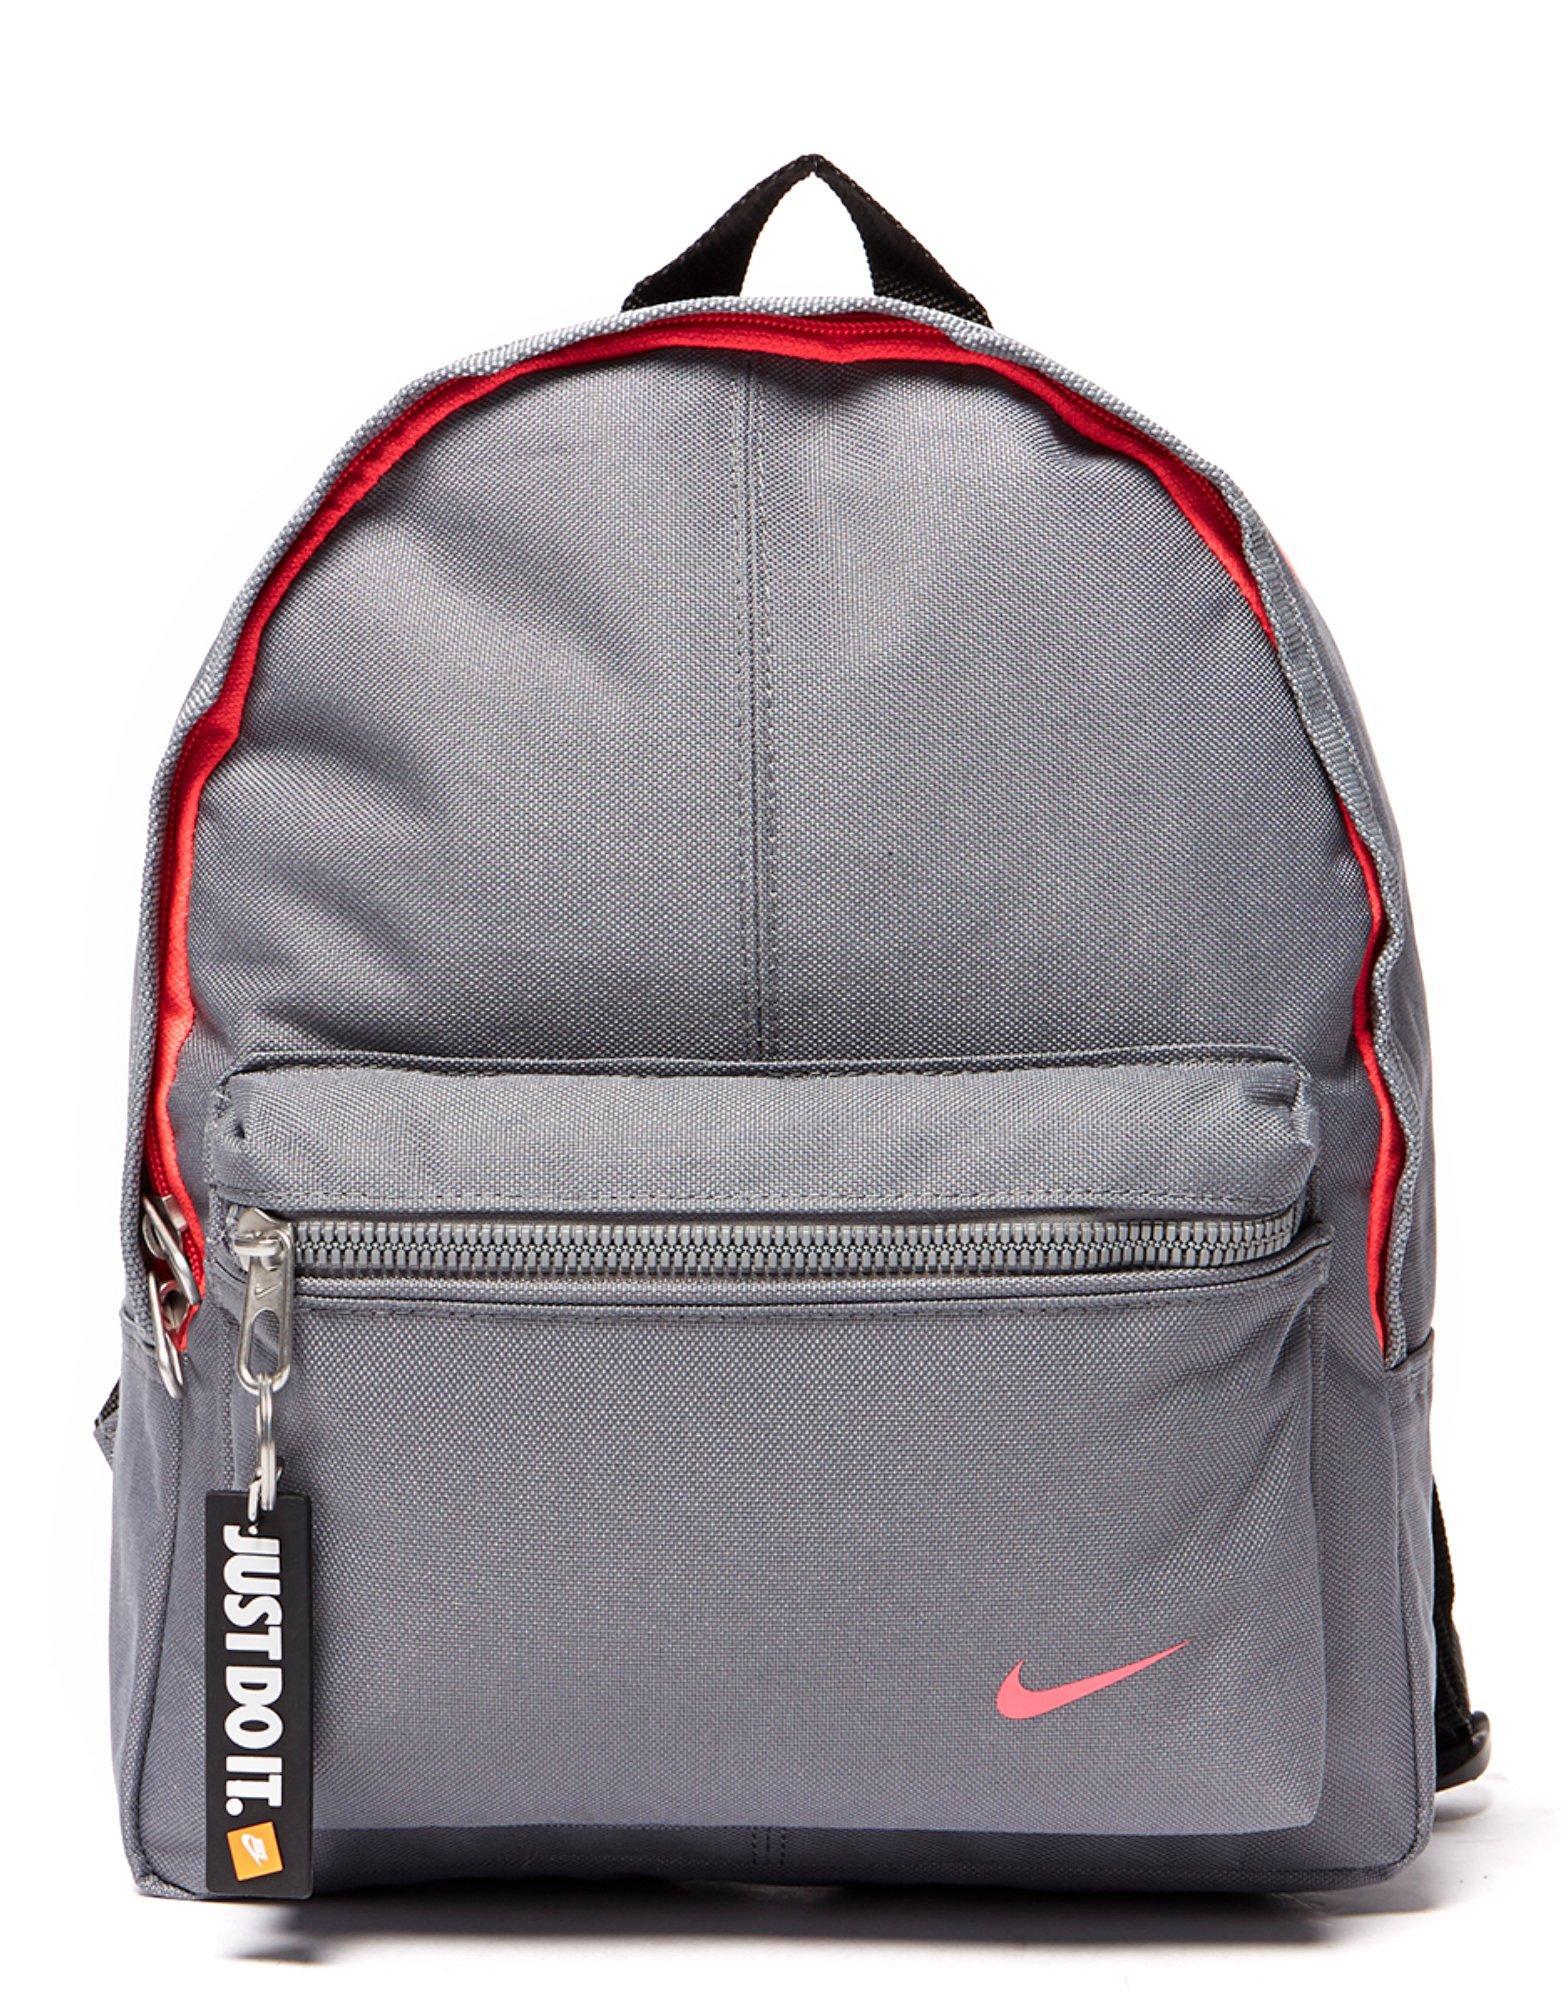 Nike Synthetic Classic Mini Backpack in Grey/Pink (Grey) for Men - Lyst